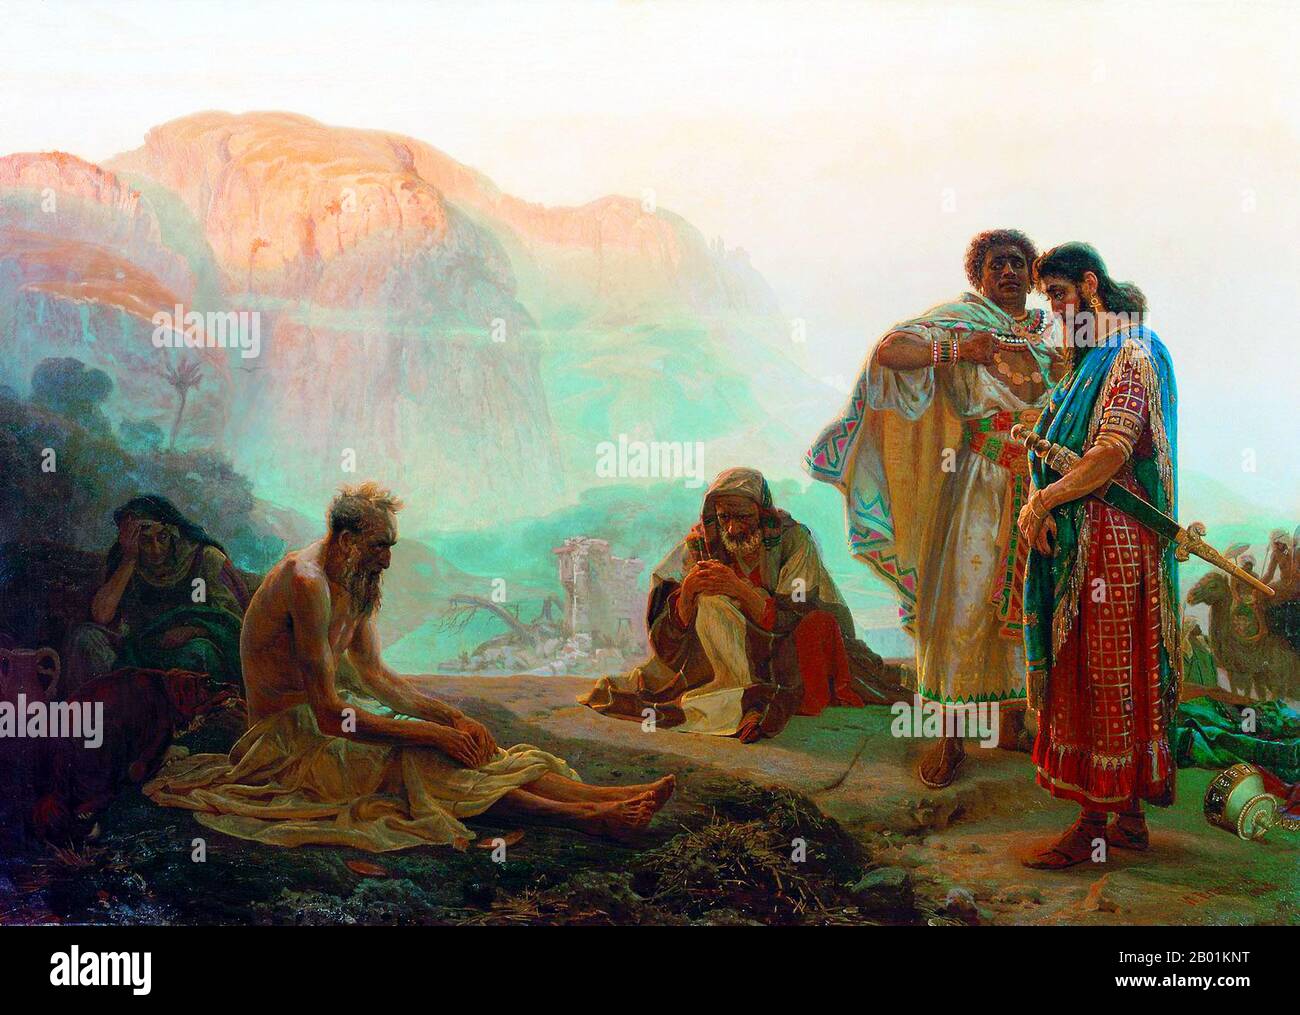 Russia: 'Job and His Friends'. Oil on canvas painting by Ilya Repin (24 July 1844 - 29 September 1930), 1869.  Job is the central character of the Book of Job in the Hebrew Bible. Job is also recognised as a prophet of God in the Qur'an.  The Book of Job begins with an introduction to Job's character. He is described as a blessed man who lives righteously. God's praise of Job prompts Satan to challenge Job's integrity and suggesting that Job serves God simply because he protects him. God removes Job's protection, allowing Satan to take his wealth, his children and his physical health. Stock Photo